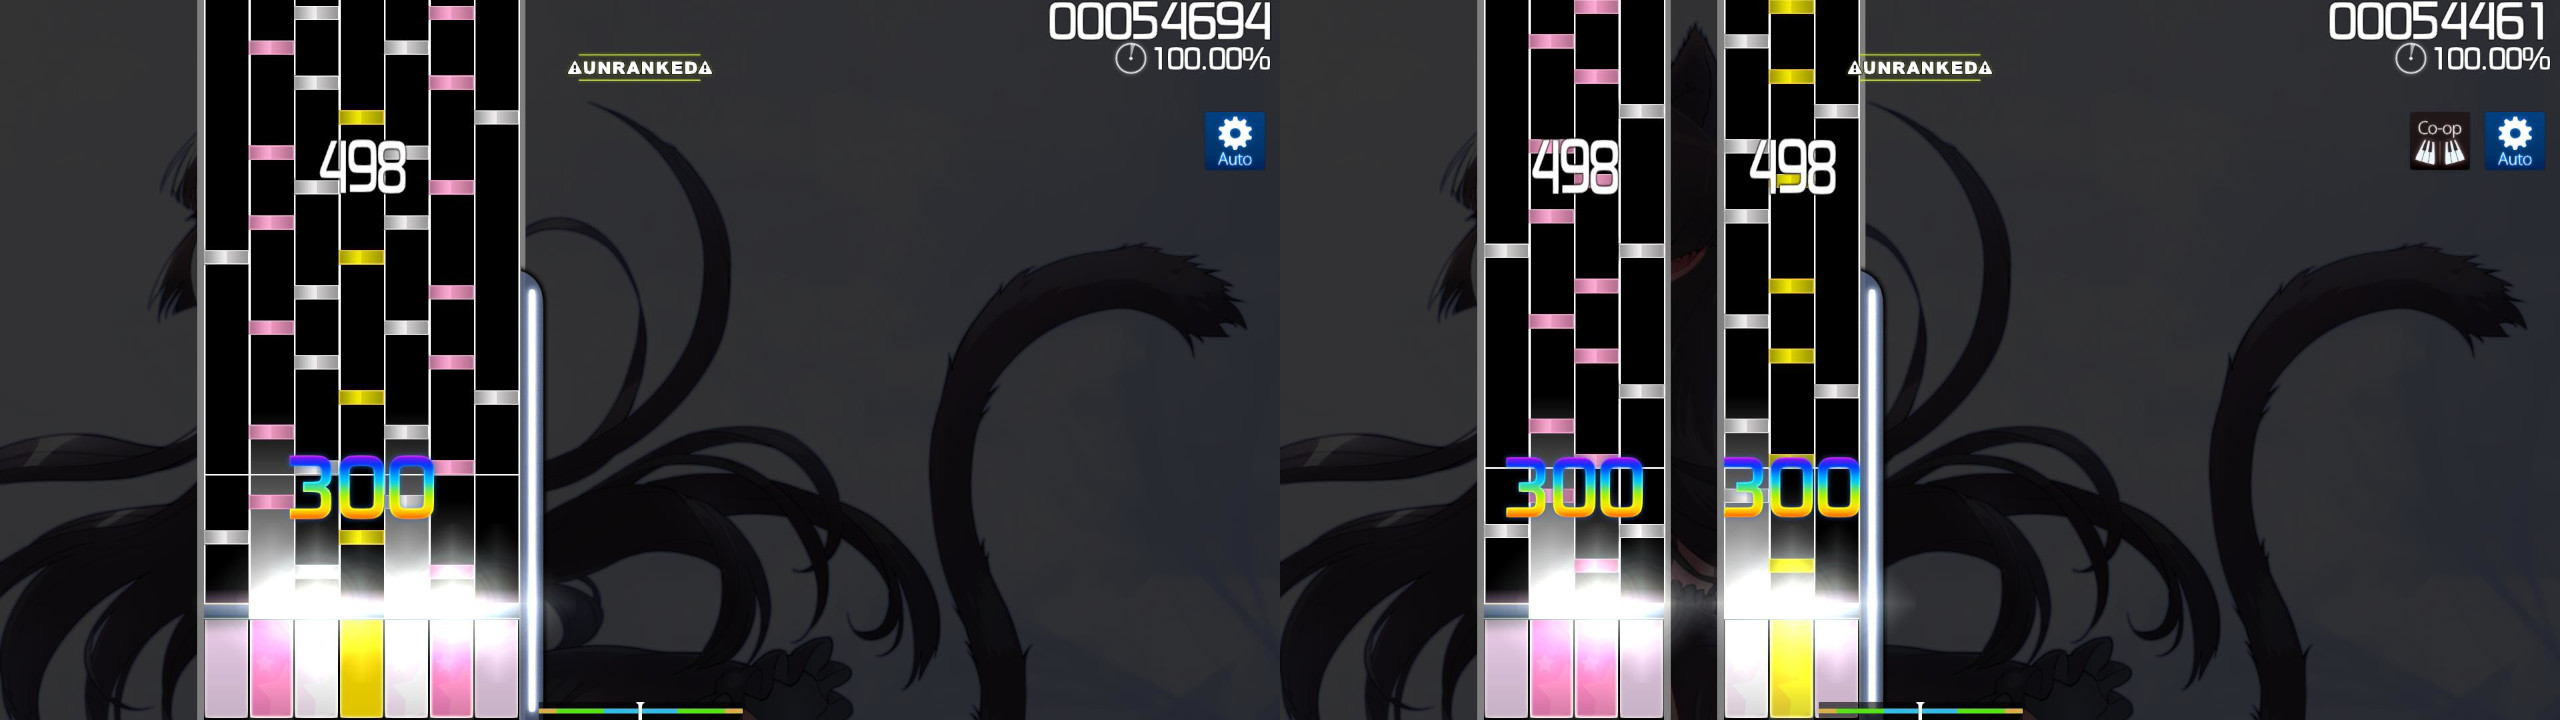 osu!mania-specific Co-op gameplay comparison